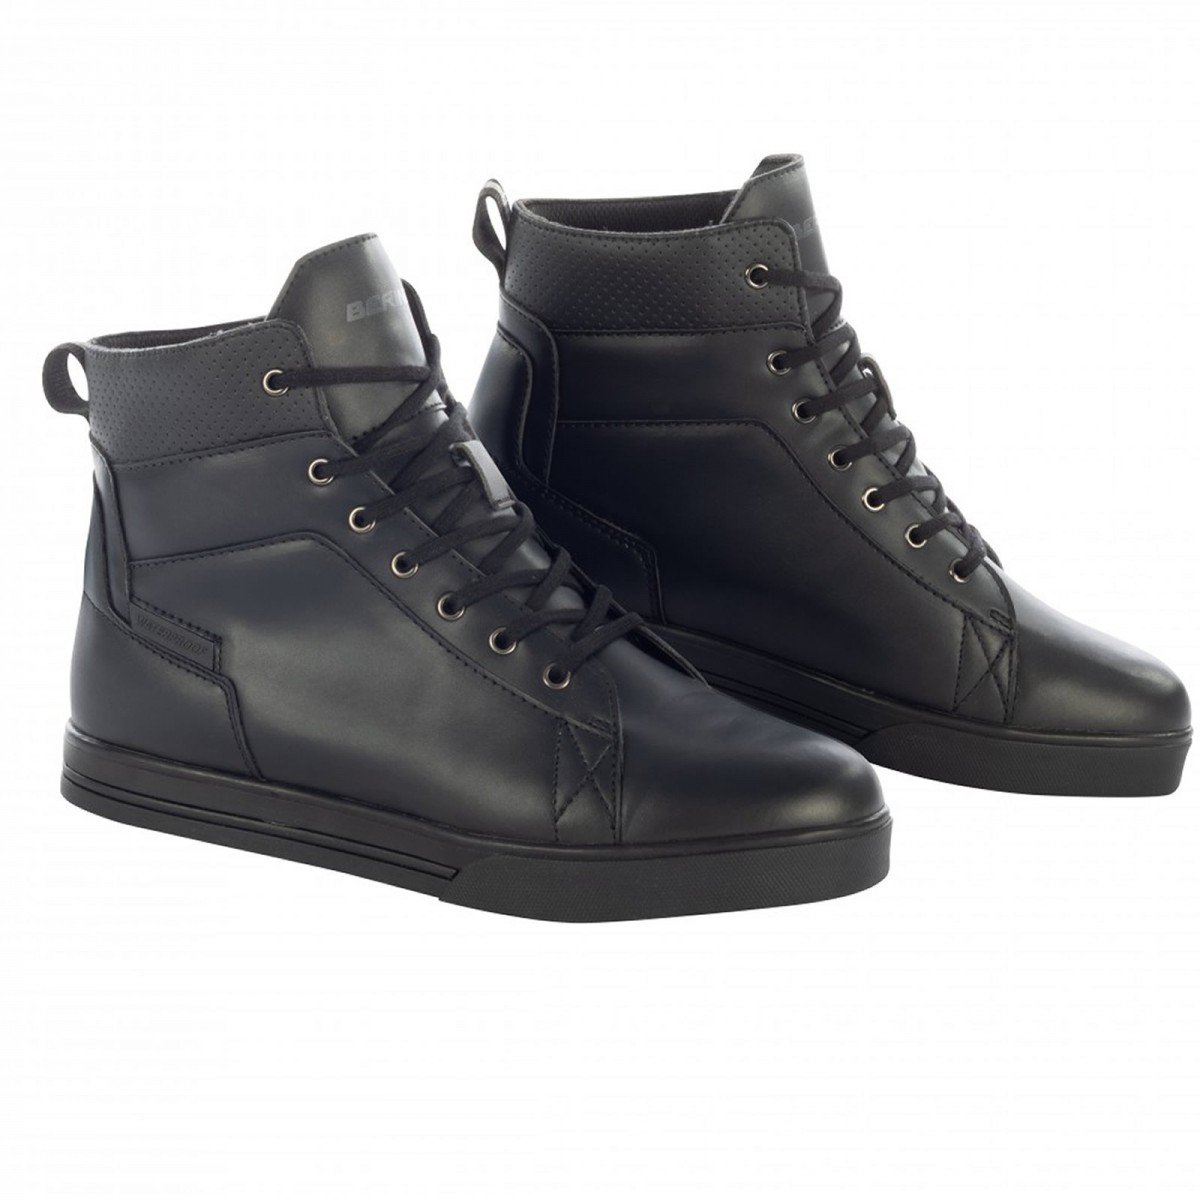 Image of Bering Sneakers Indy Black Talla 43